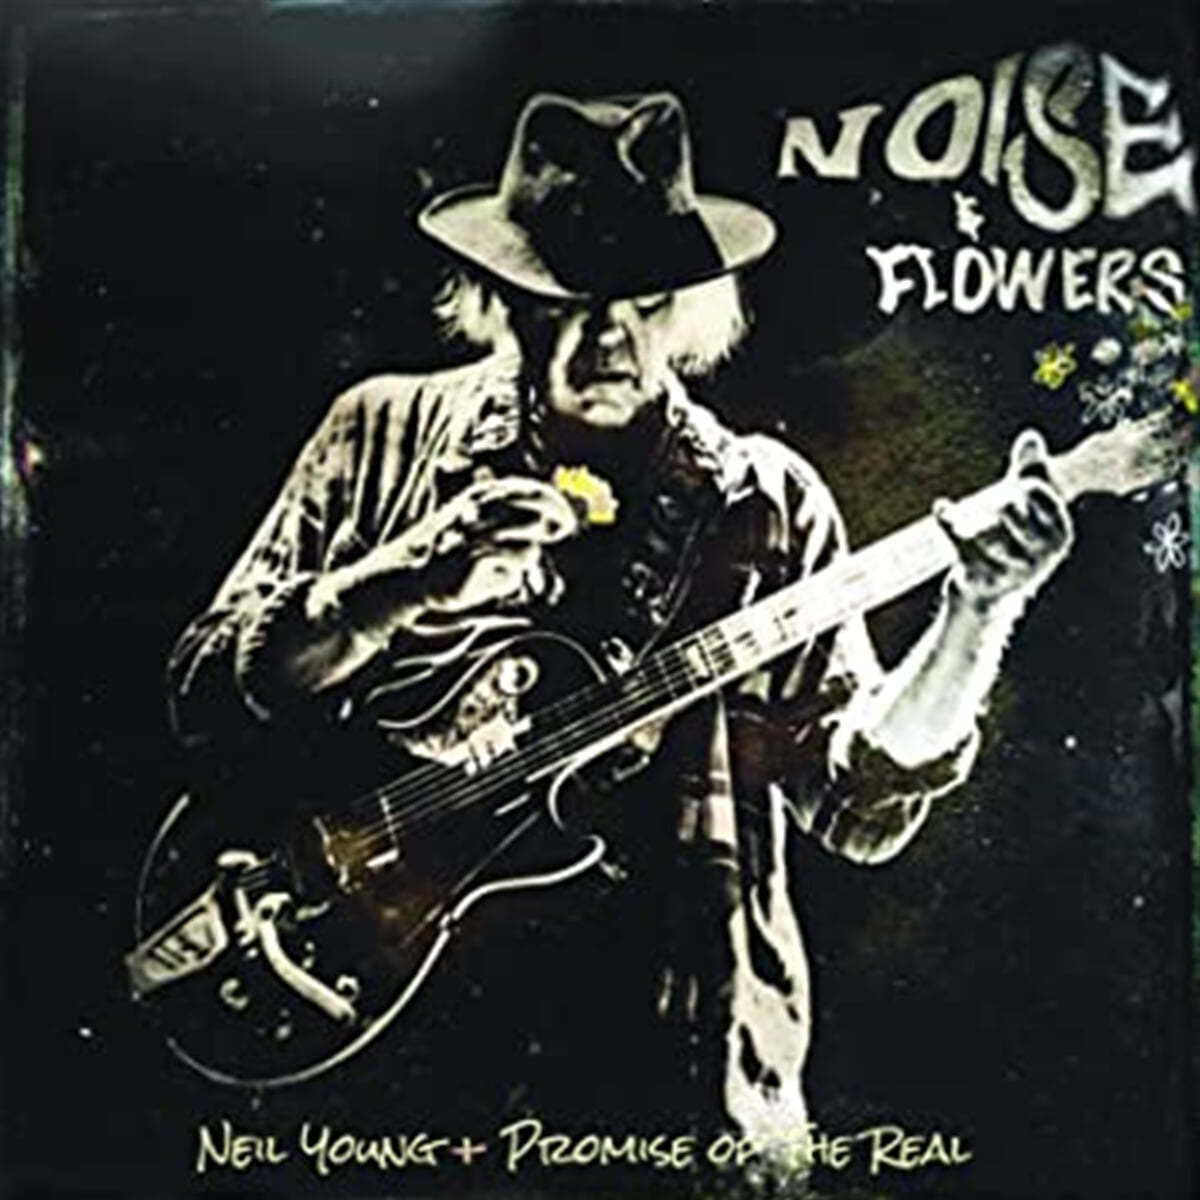 Neil Young / Promise Of The Real (닐 영 / 프로미스 오브 더 리얼) - Noise And Flowers [2LP]